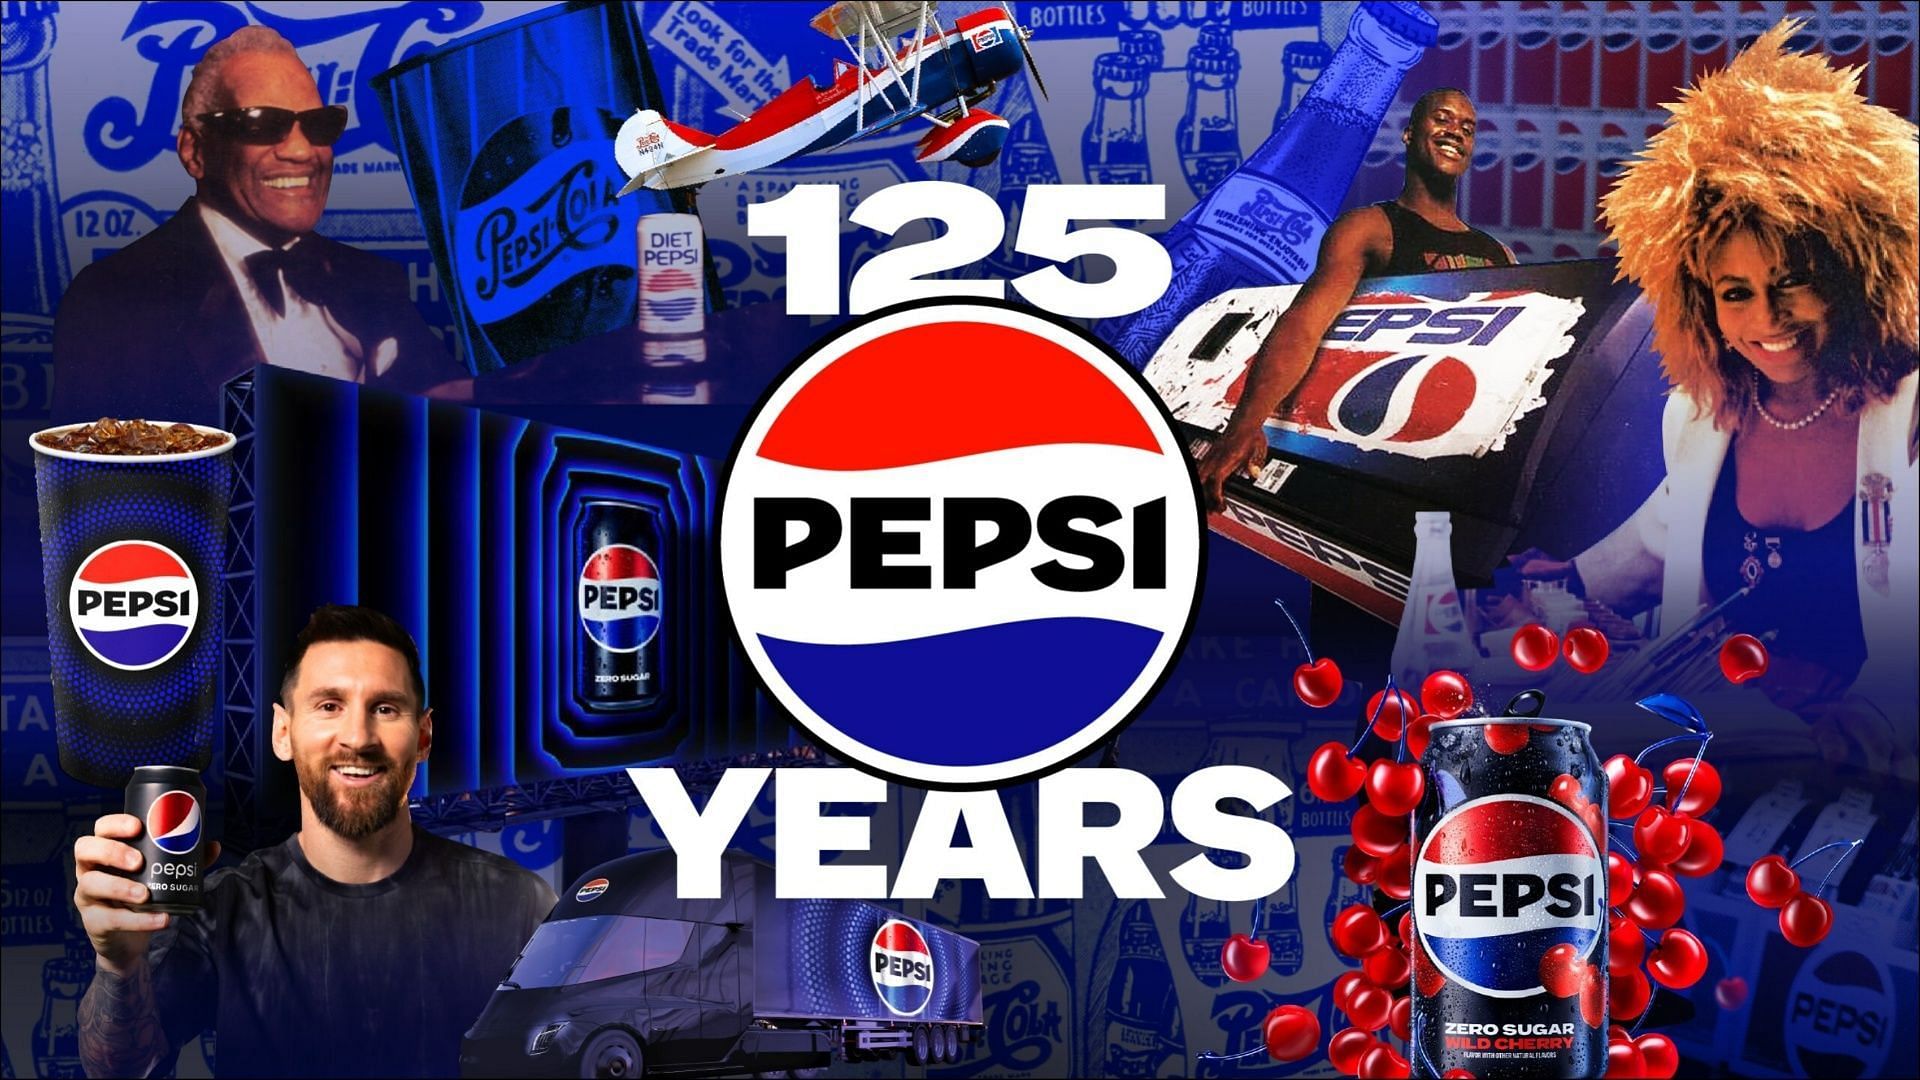 Pepsi gets ready to celebrate its 125th anniversary with free Pepsi for everyone in the U.S. (Image via PepsiCo)